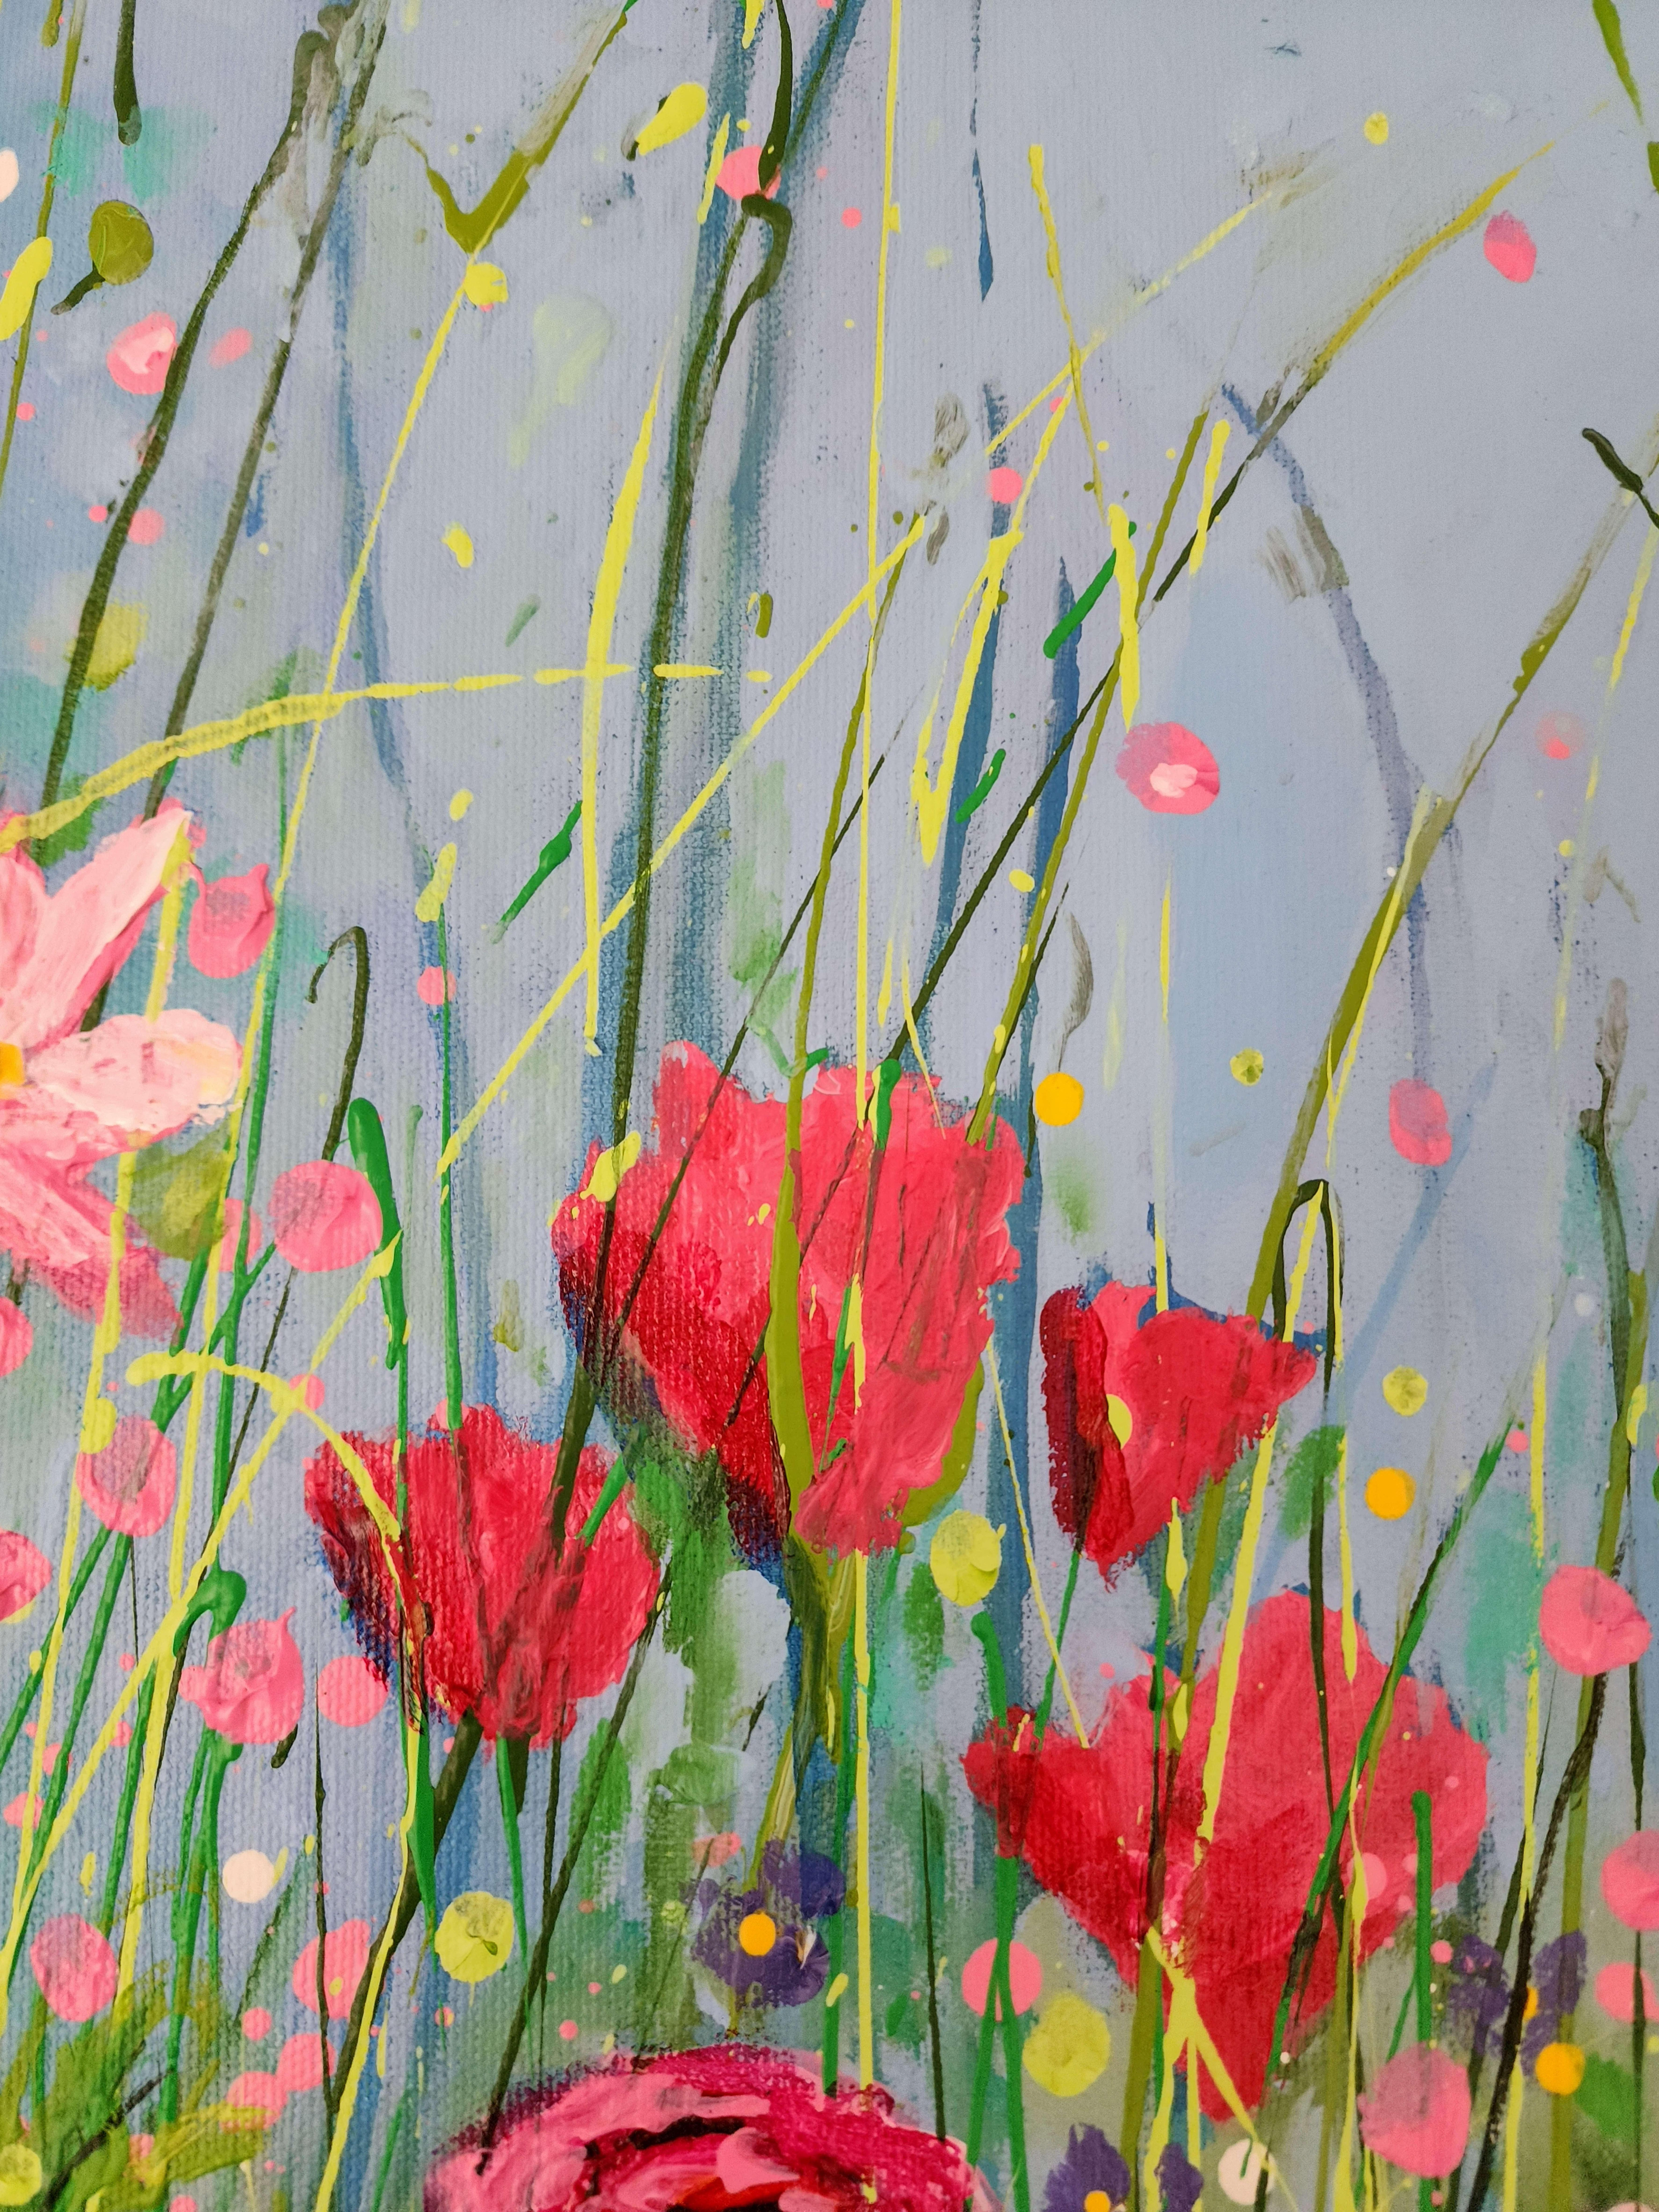 Title: Enchanted - Joy-bringers in Pink - Floral 

Meadow Flowers Soft Abstract Invest Nature Joy Stillness 

In this vibrant acrylic painting, I've poured my passion for the abstract and expressionist styles into a field of blossoming joy. Each